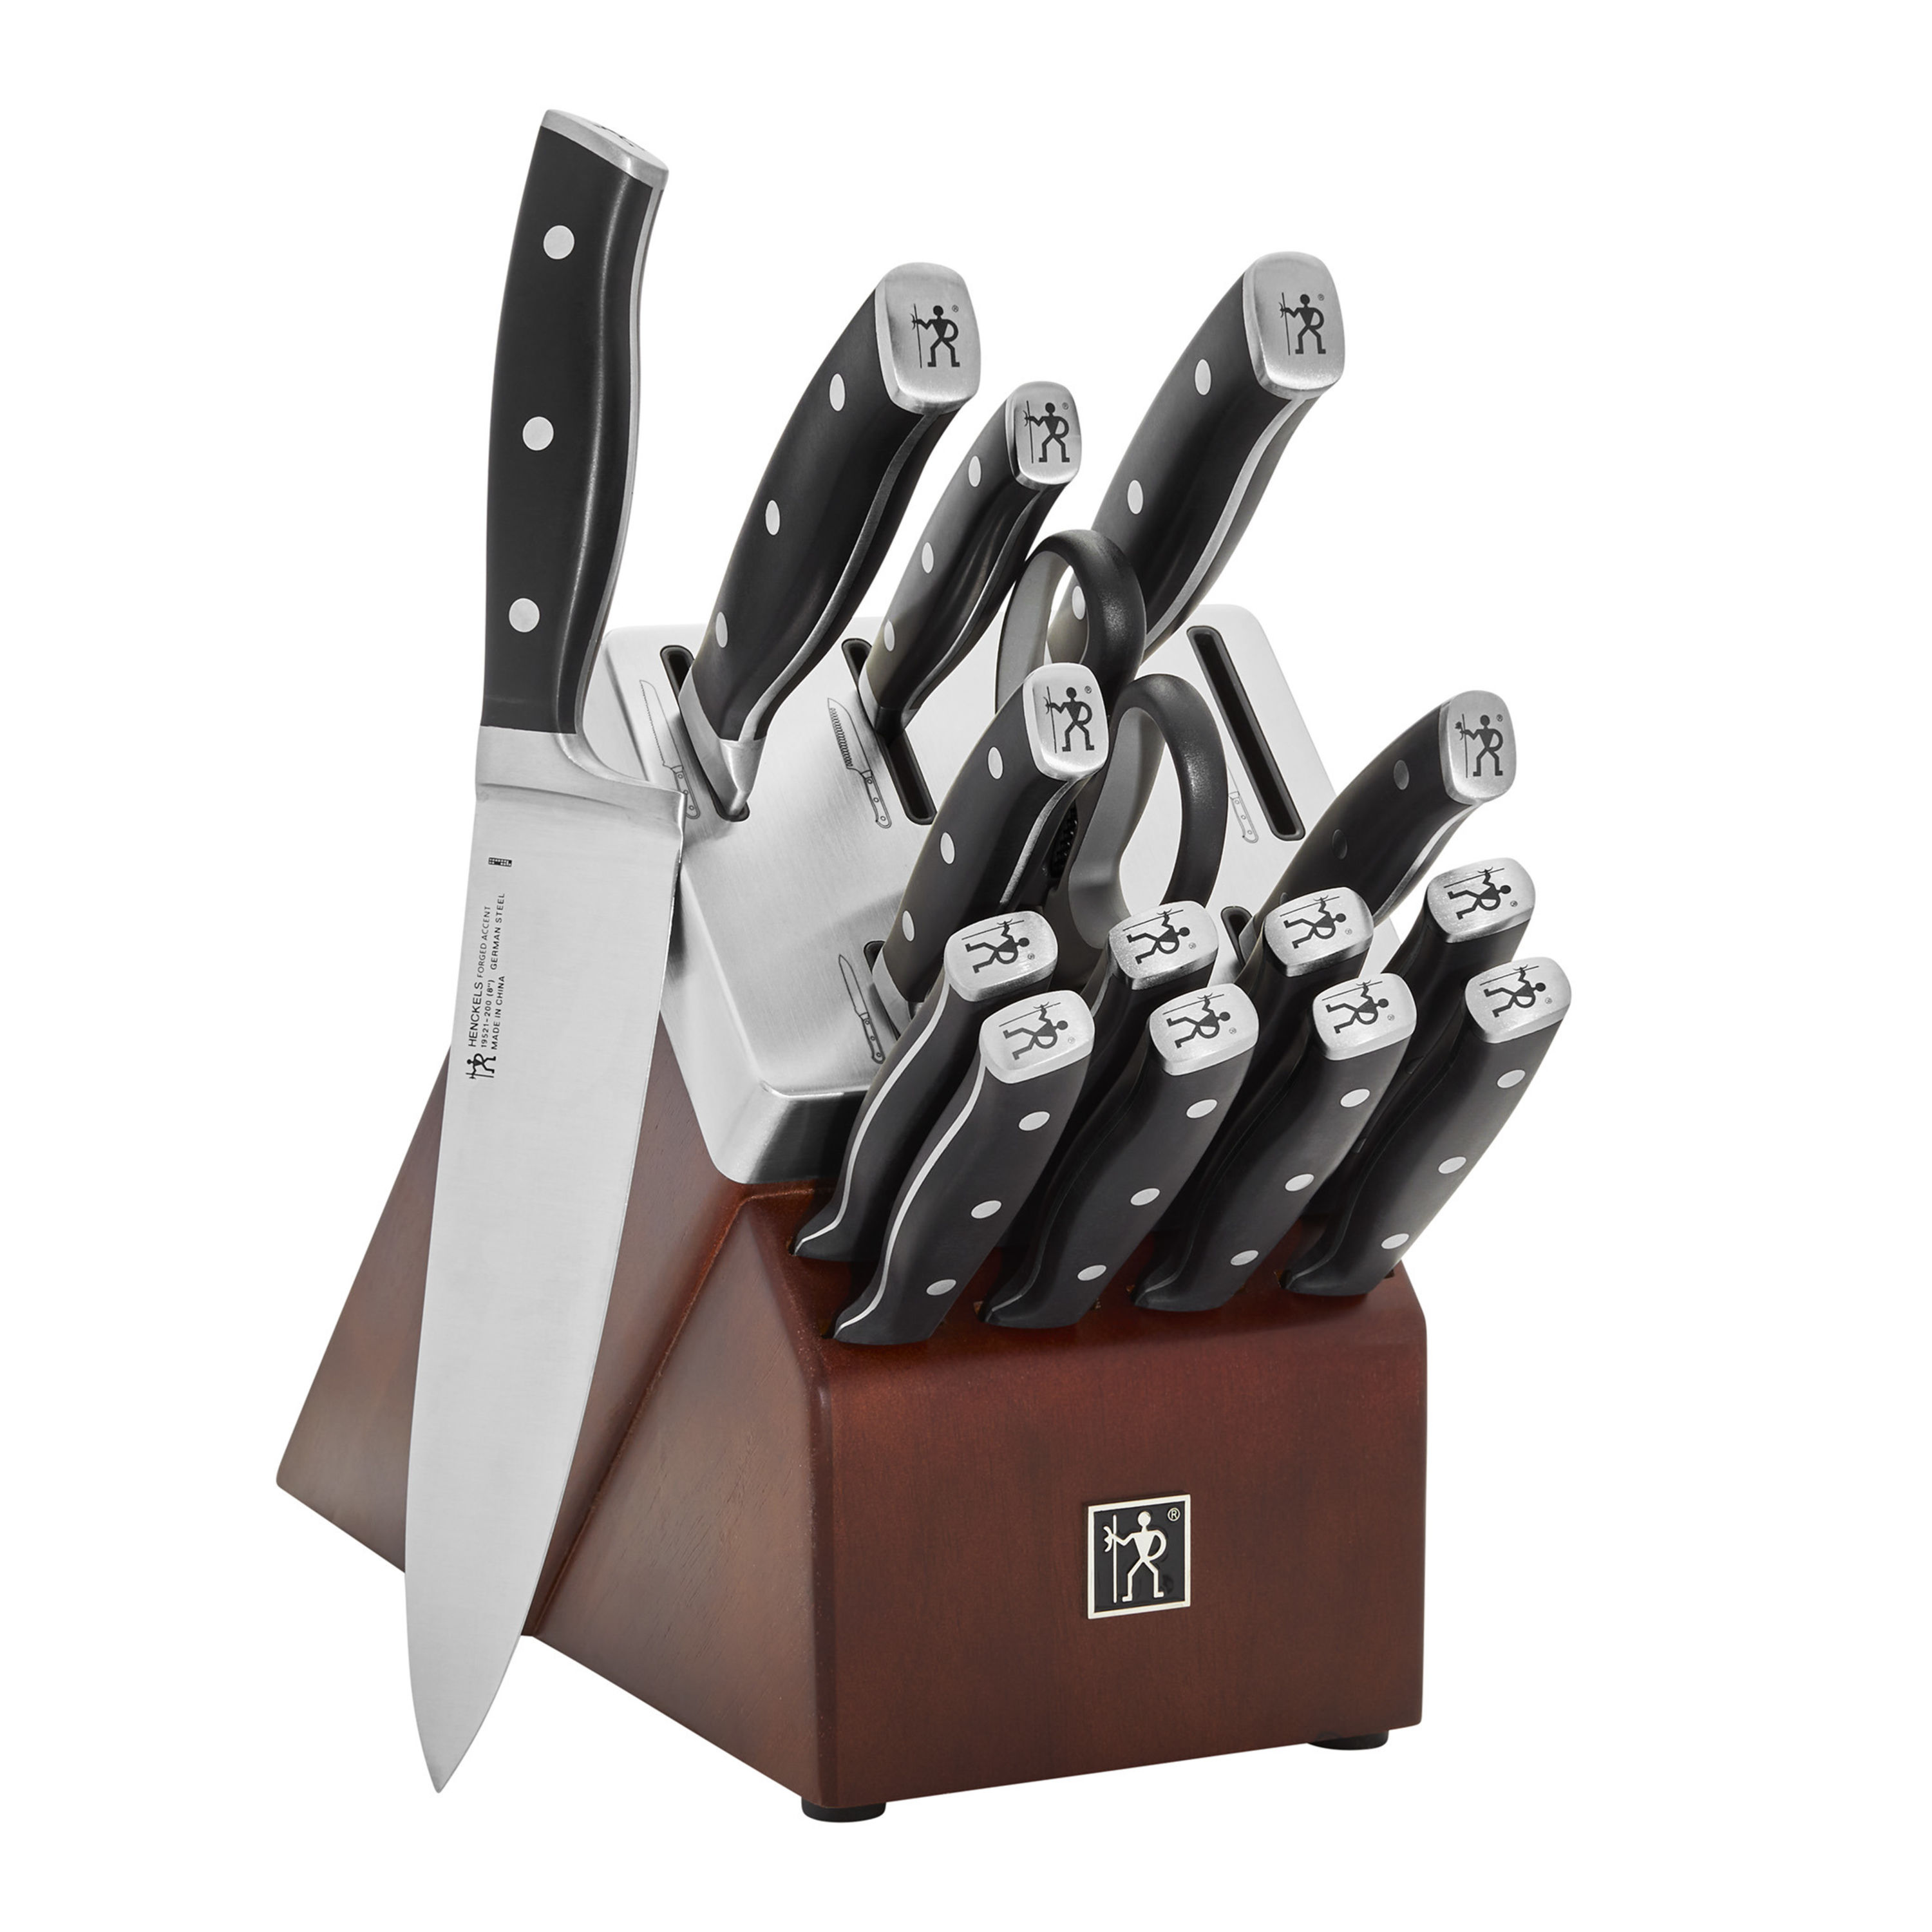 Henckels Forged Accent 2-Pc Prep Set & Reviews